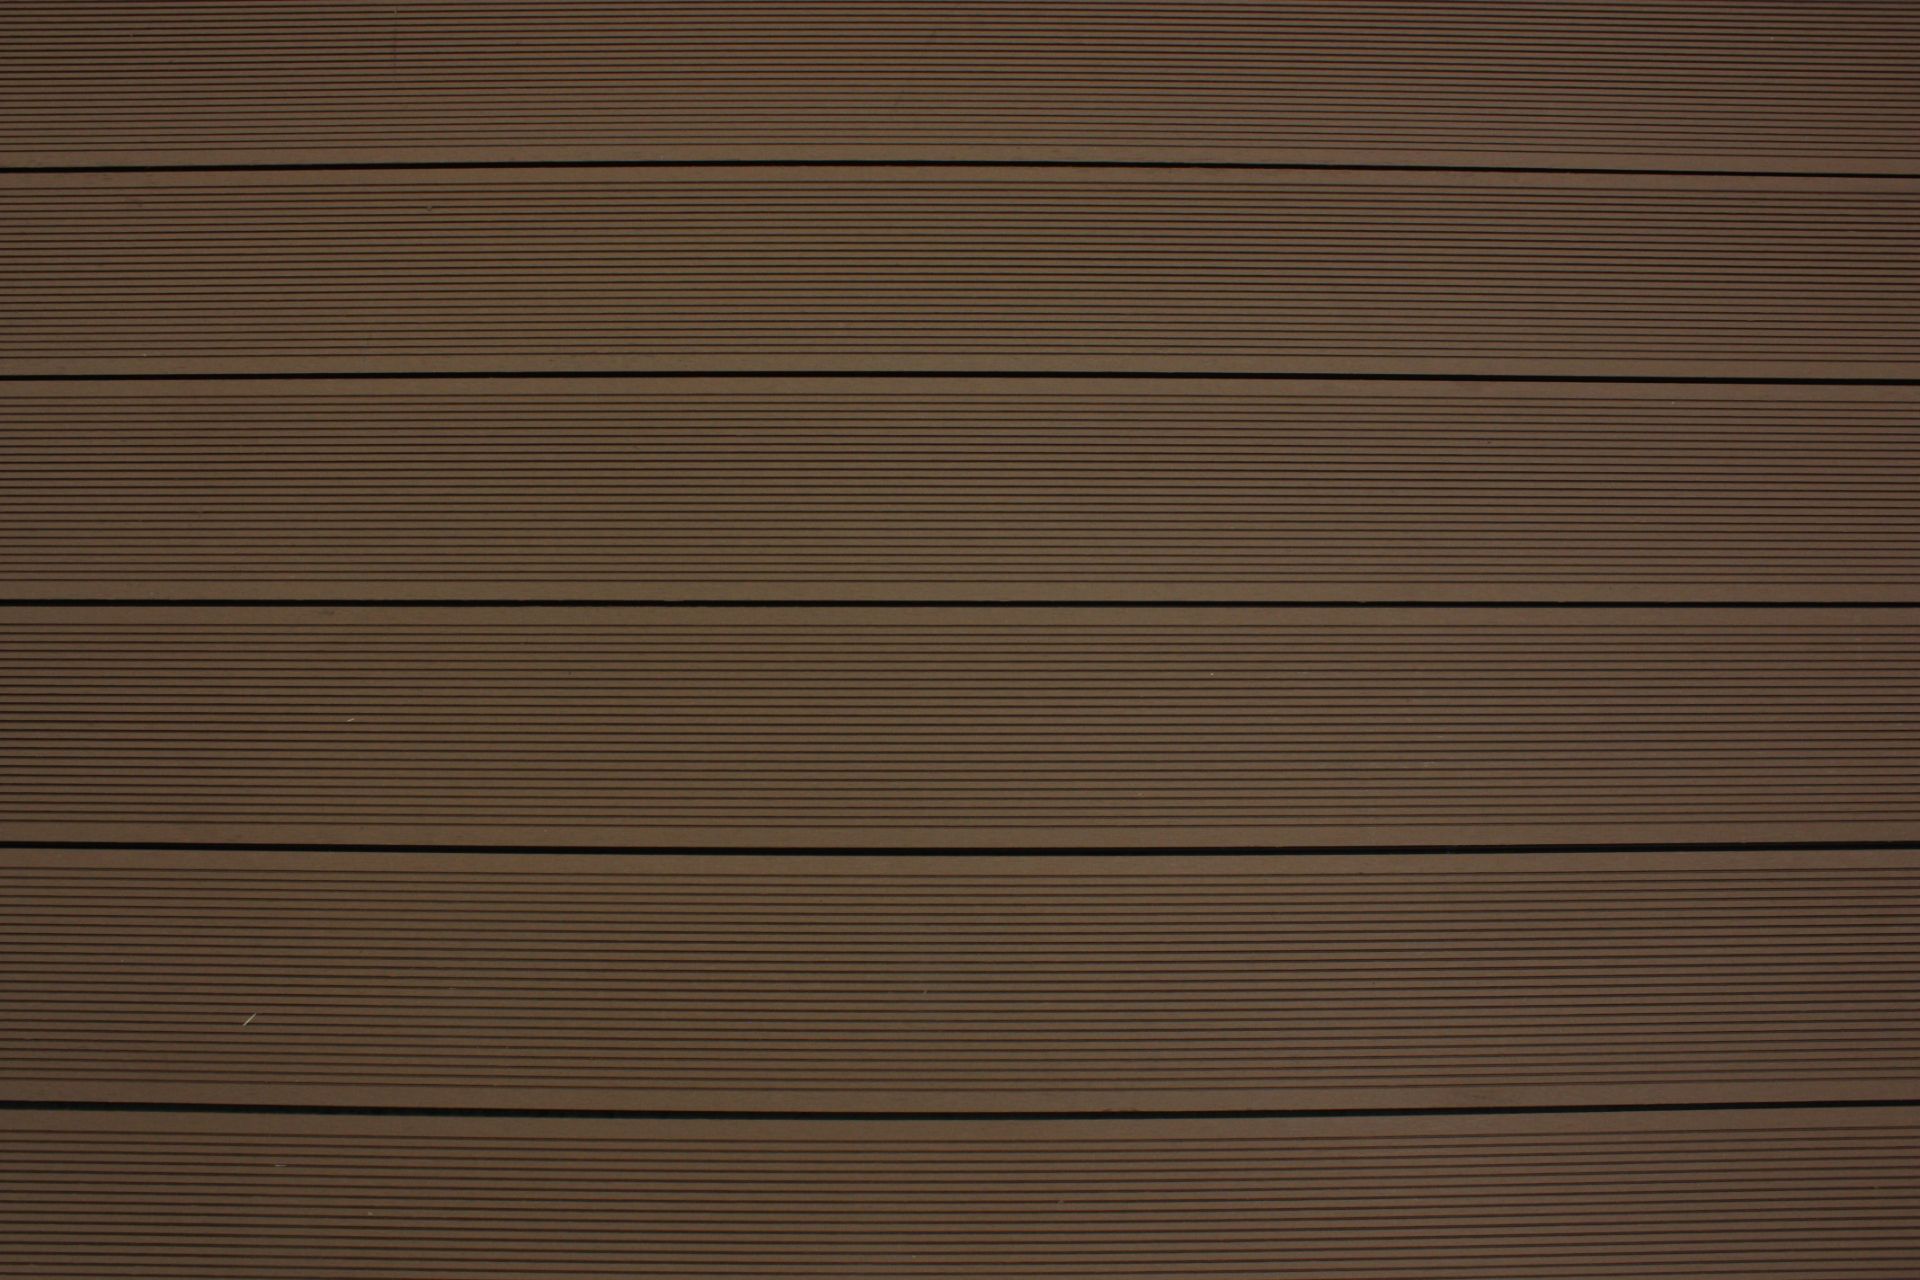 50 boards, 21sqm, Endura Mid Brown Composite Decking, HO1000 - Image 2 of 2